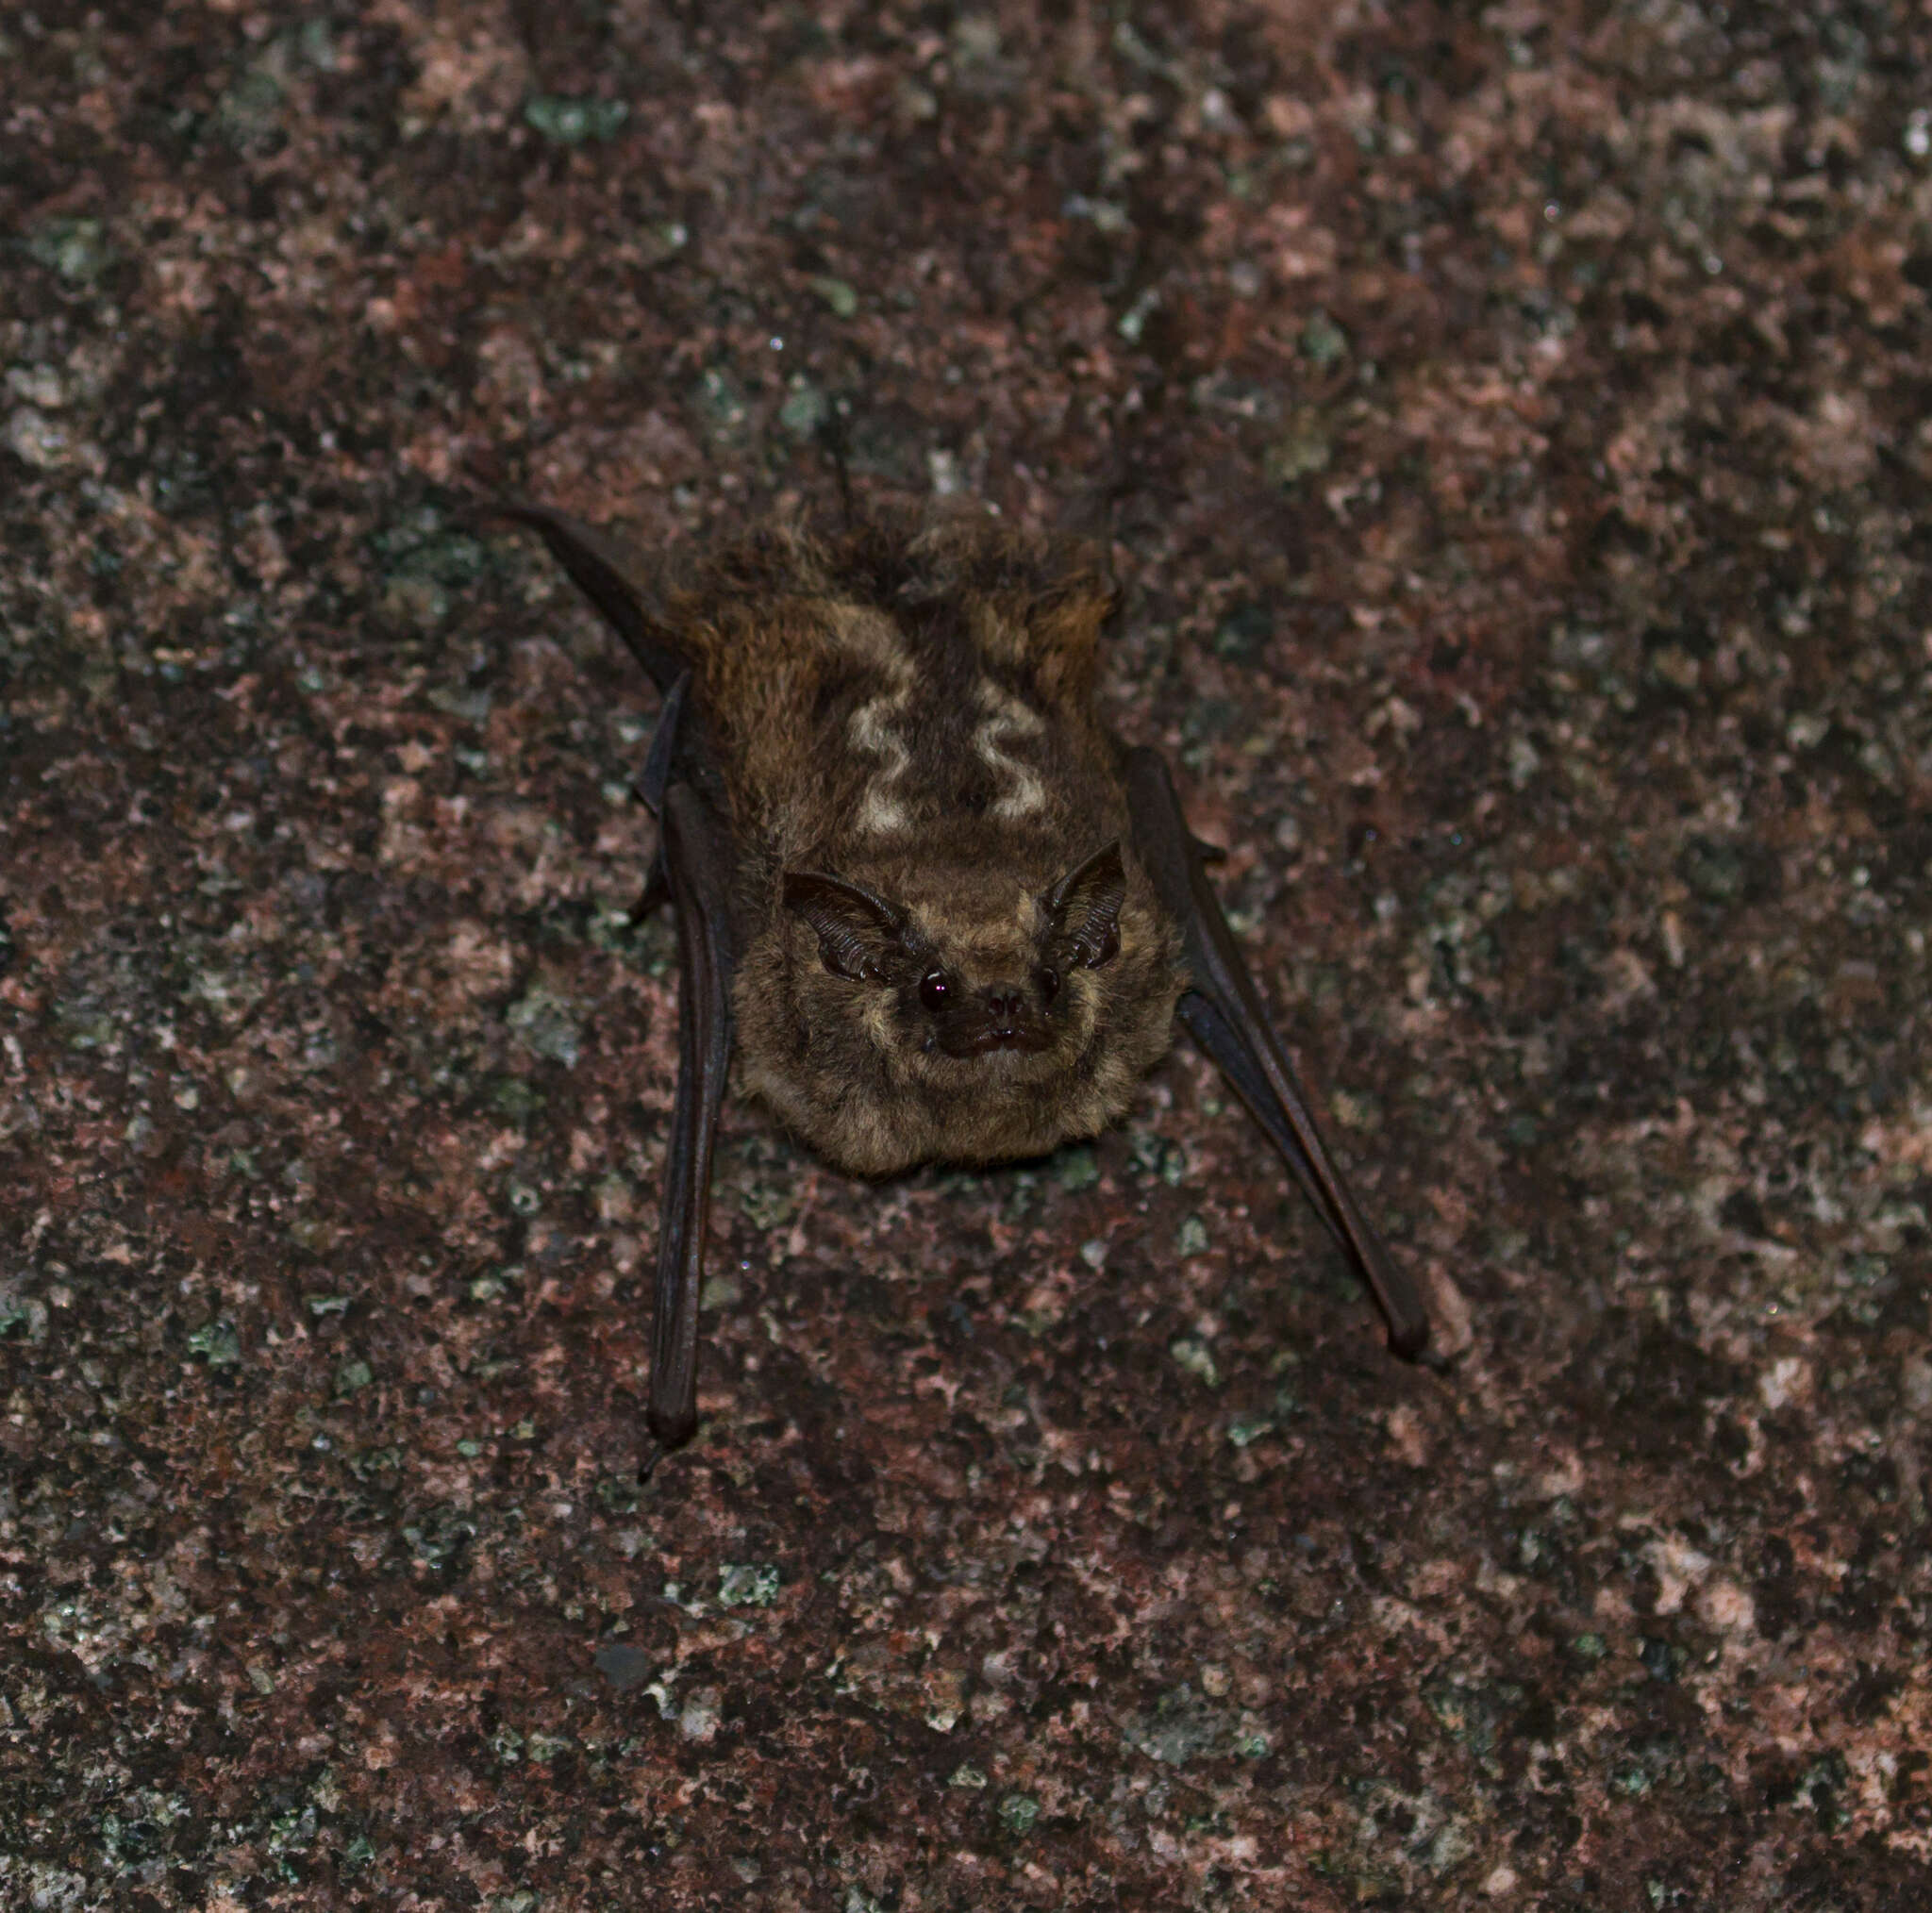 Image of Frosted Sac-winged Bat